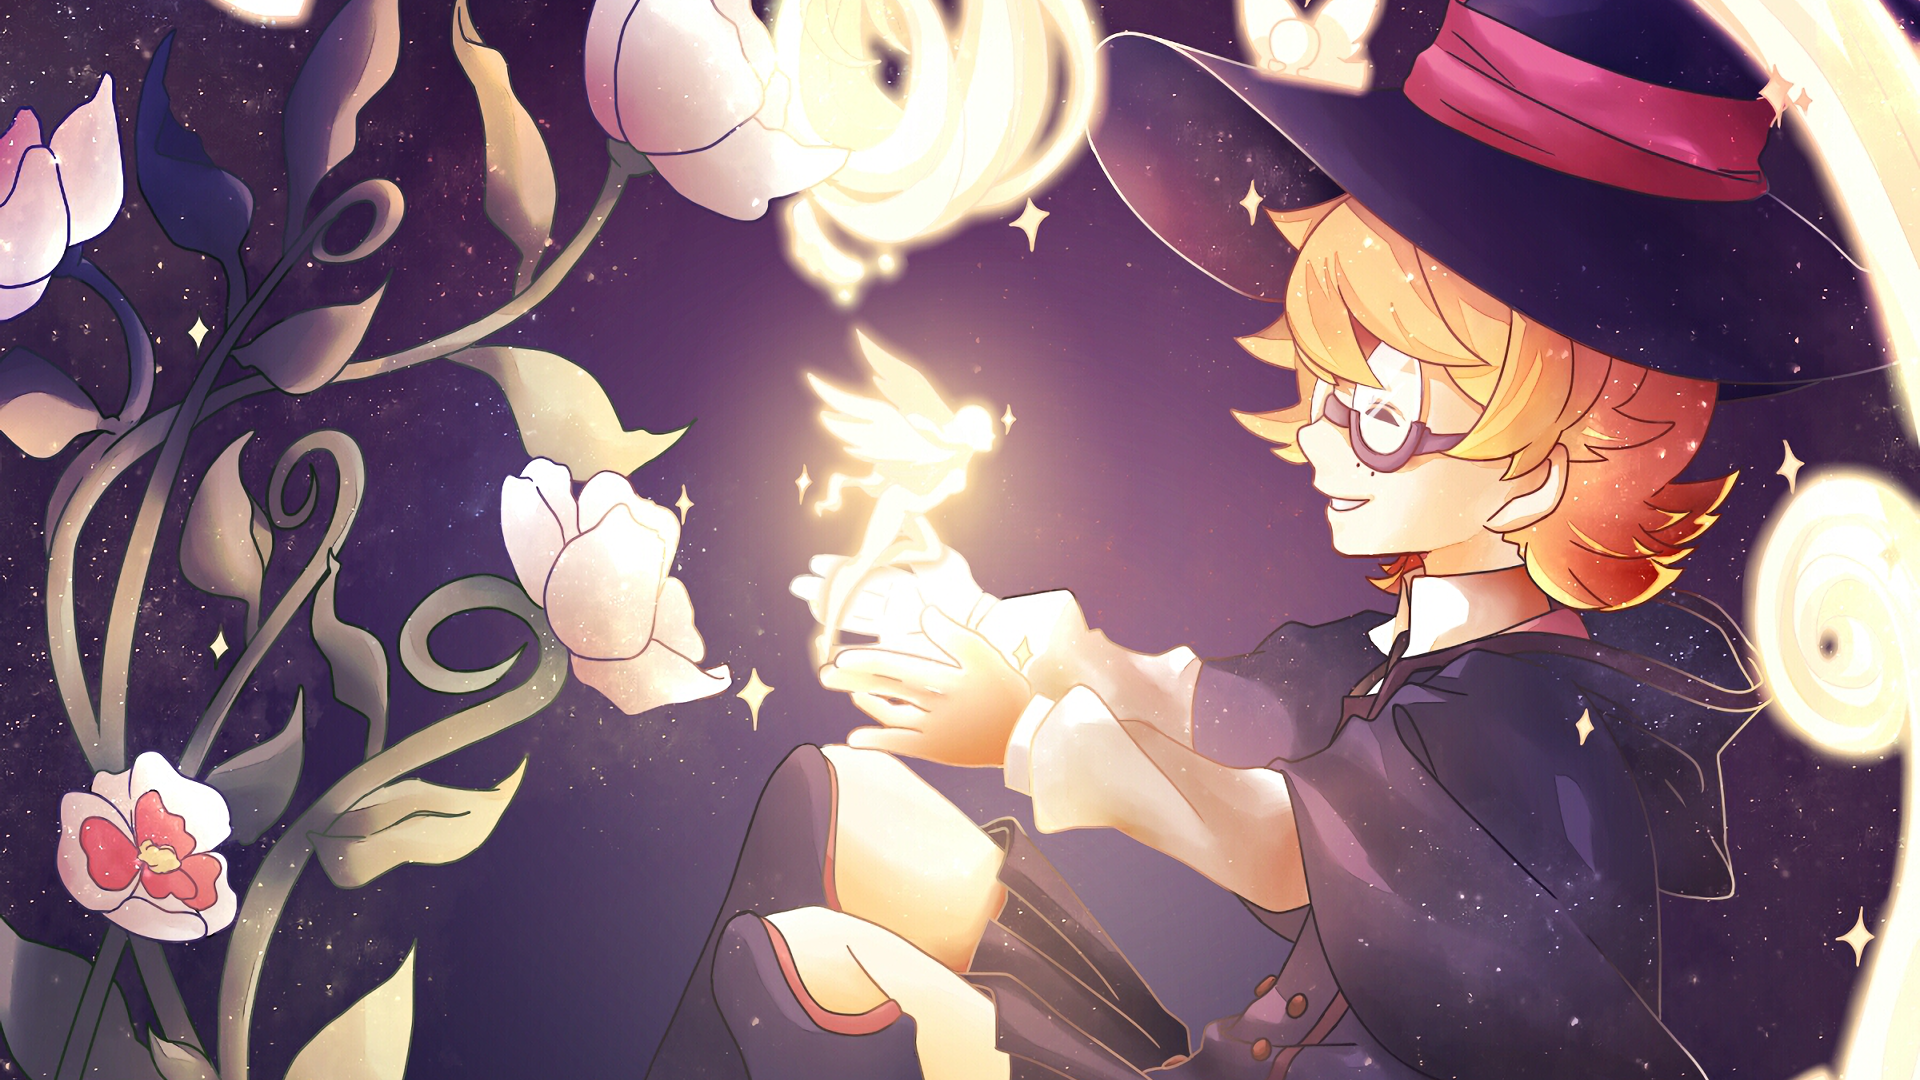 Wallpaper  1920x1080 px anime girls Little Witch Academia witch  1920x1080  wallup  1030423  HD Wallpapers  WallHere